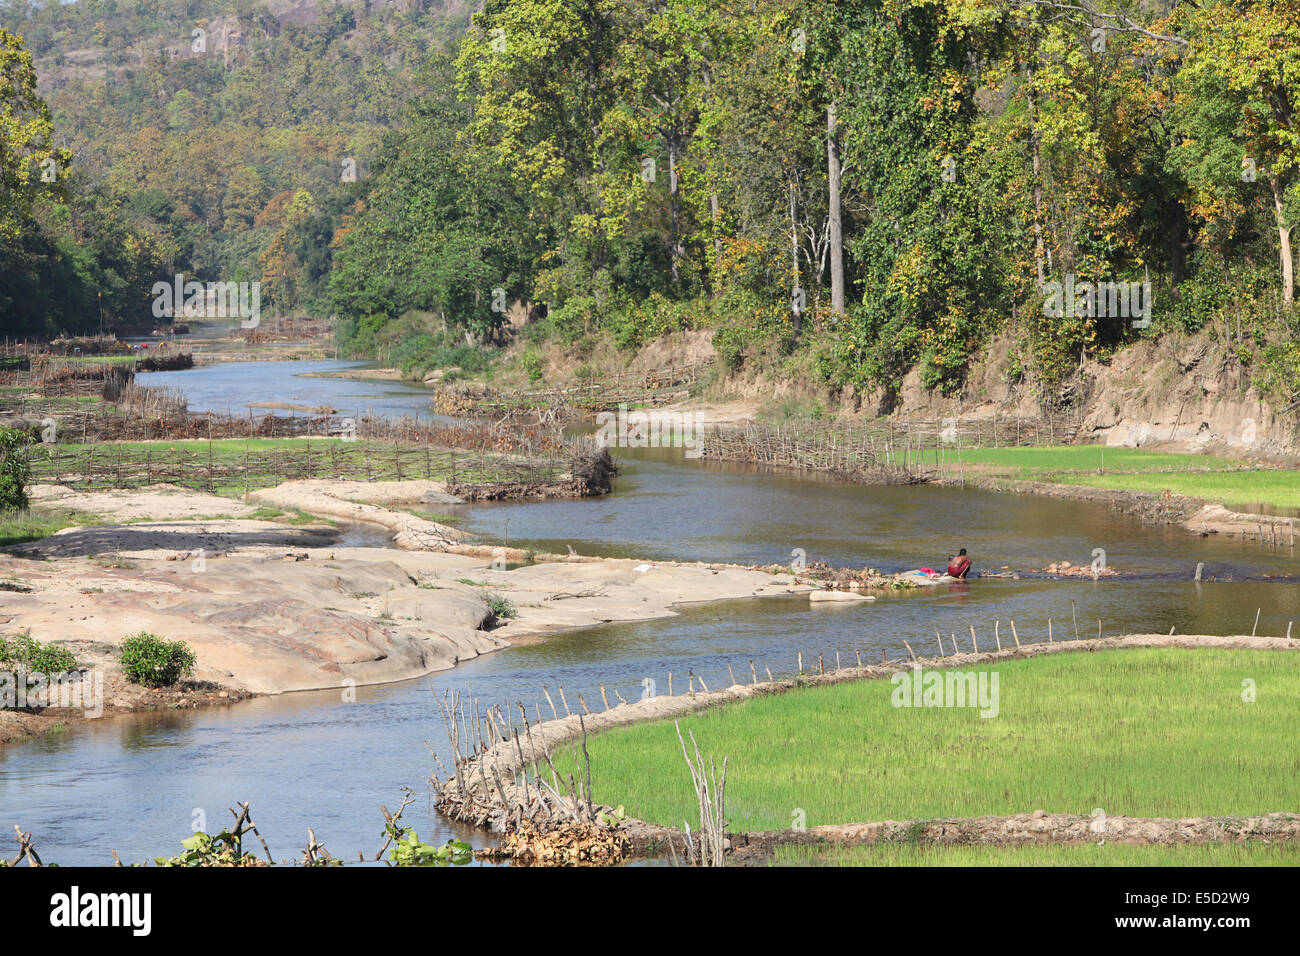 Landscape with still water and forest, Chattisgadh, India Stock Photo